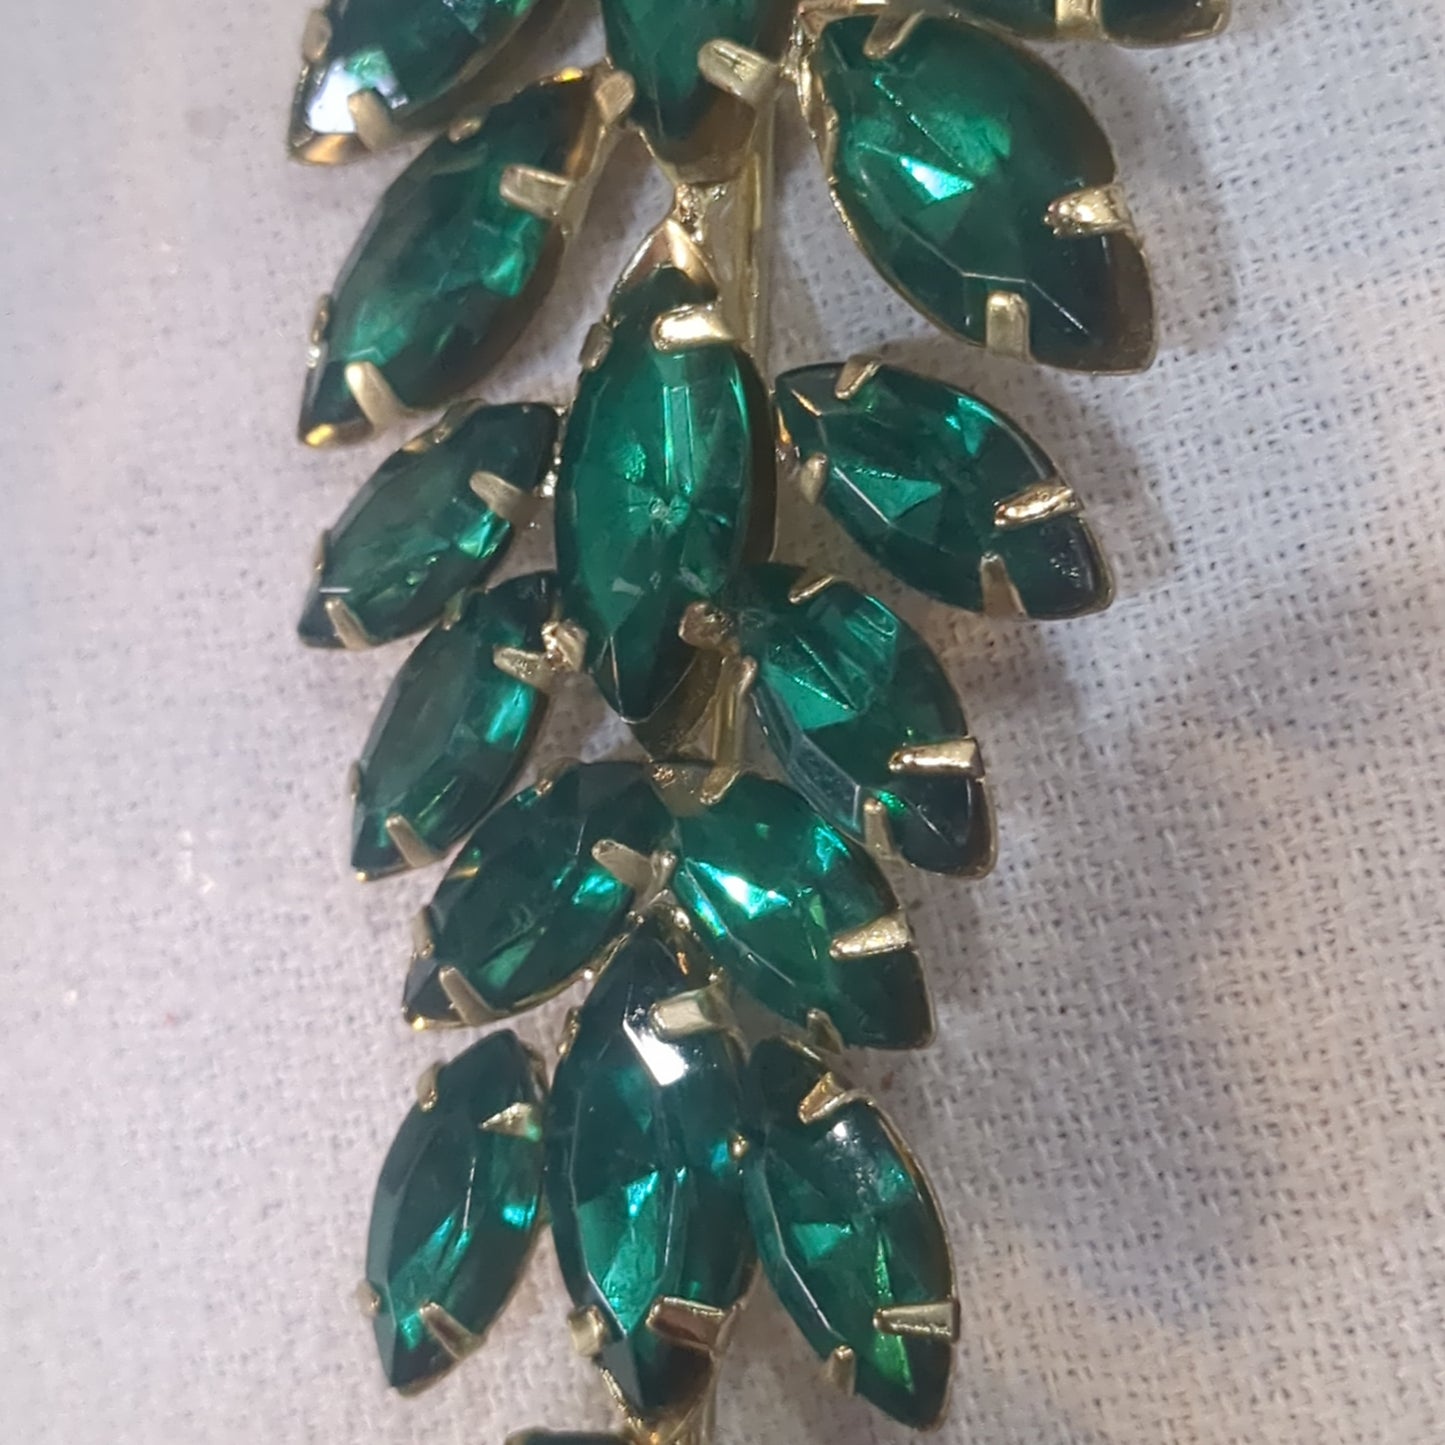 Acrylic green and clear jewel ornament, 5.25in